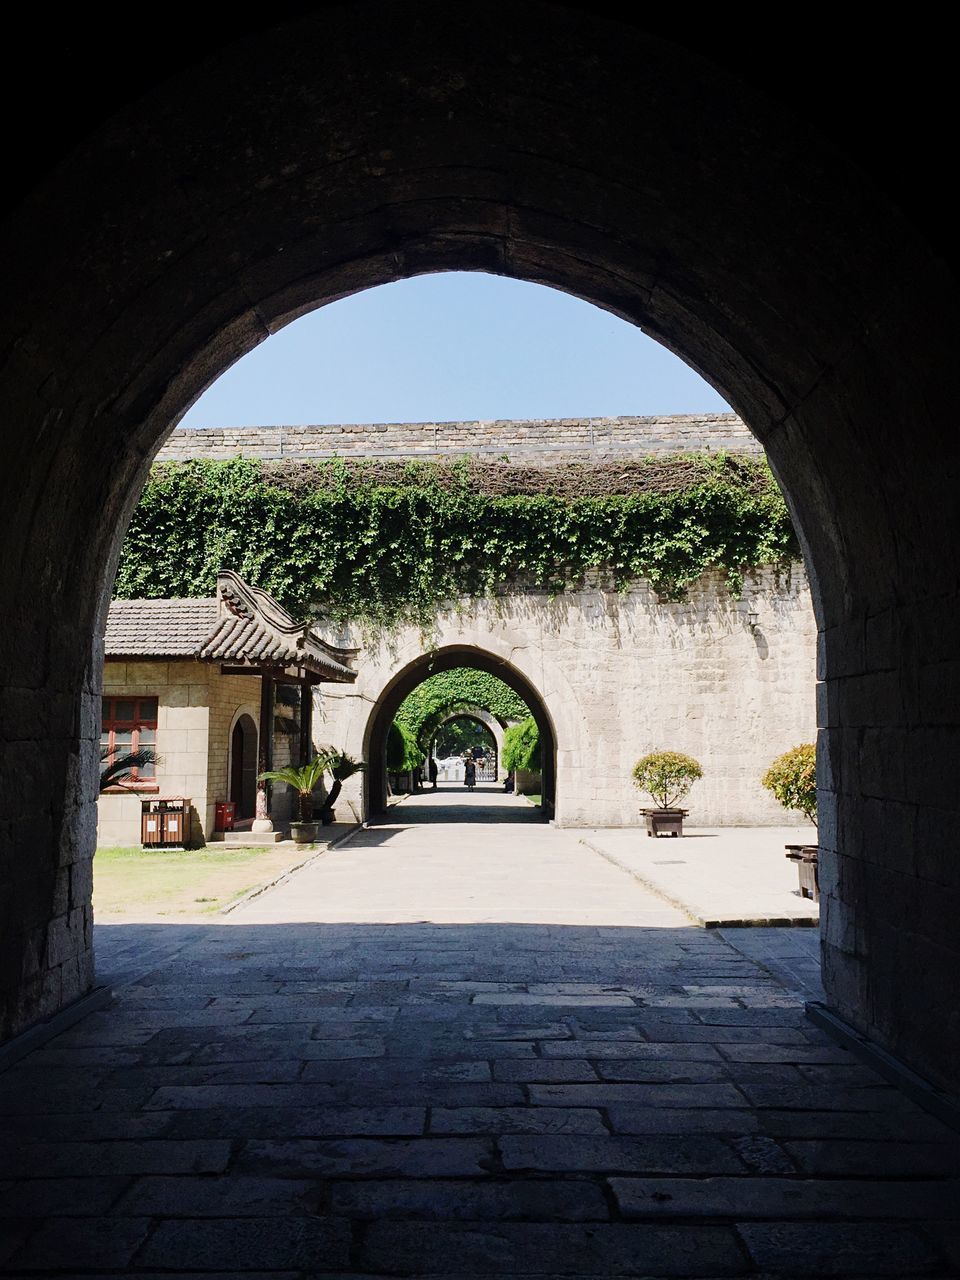 arch, architecture, built structure, indoors, building exterior, archway, entrance, window, tree, day, gate, history, no people, plant, sunlight, sky, door, circle, arched, house